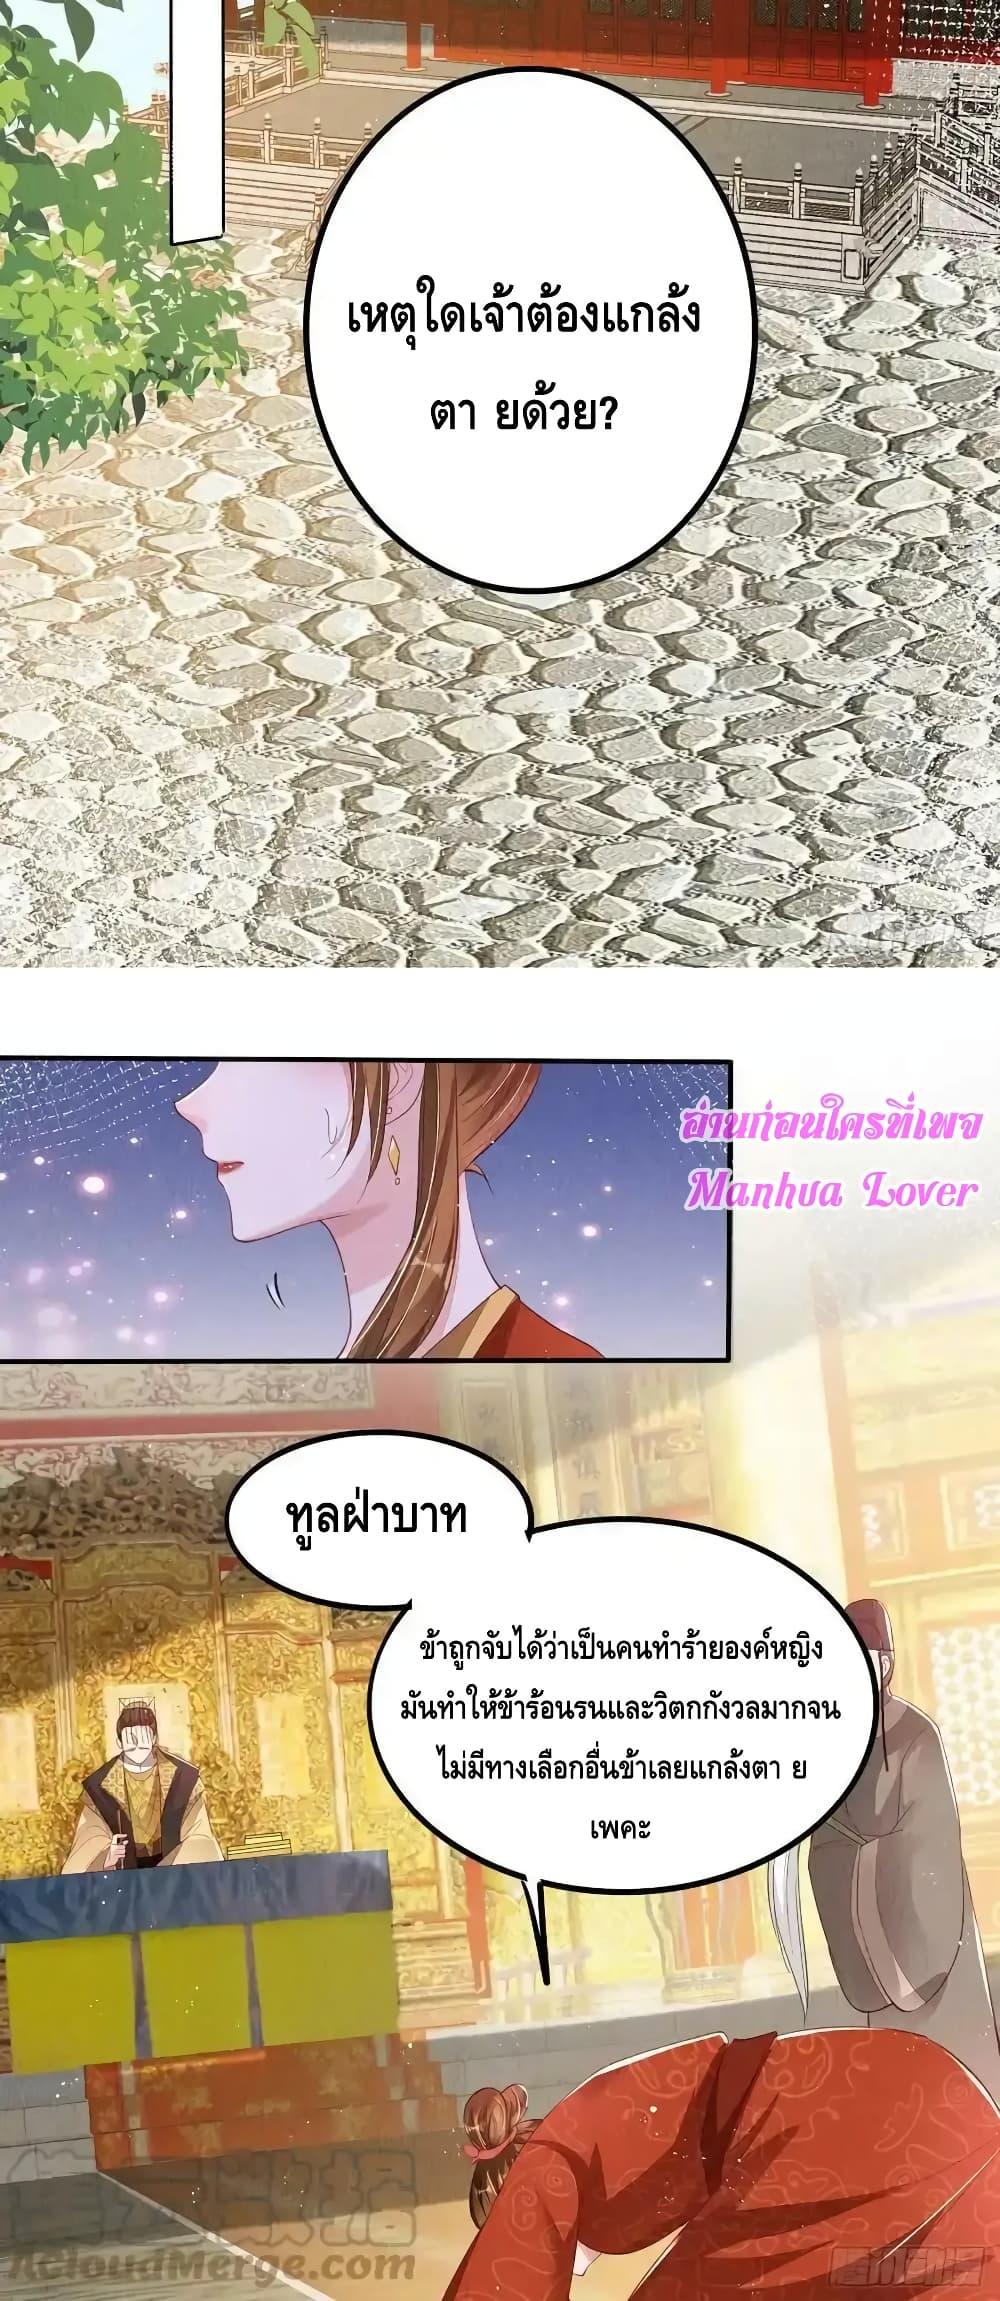 After I Bloom, a Hundred Flowers Will ill – ดอกไม้นับ ตอนที่ 70 (9)